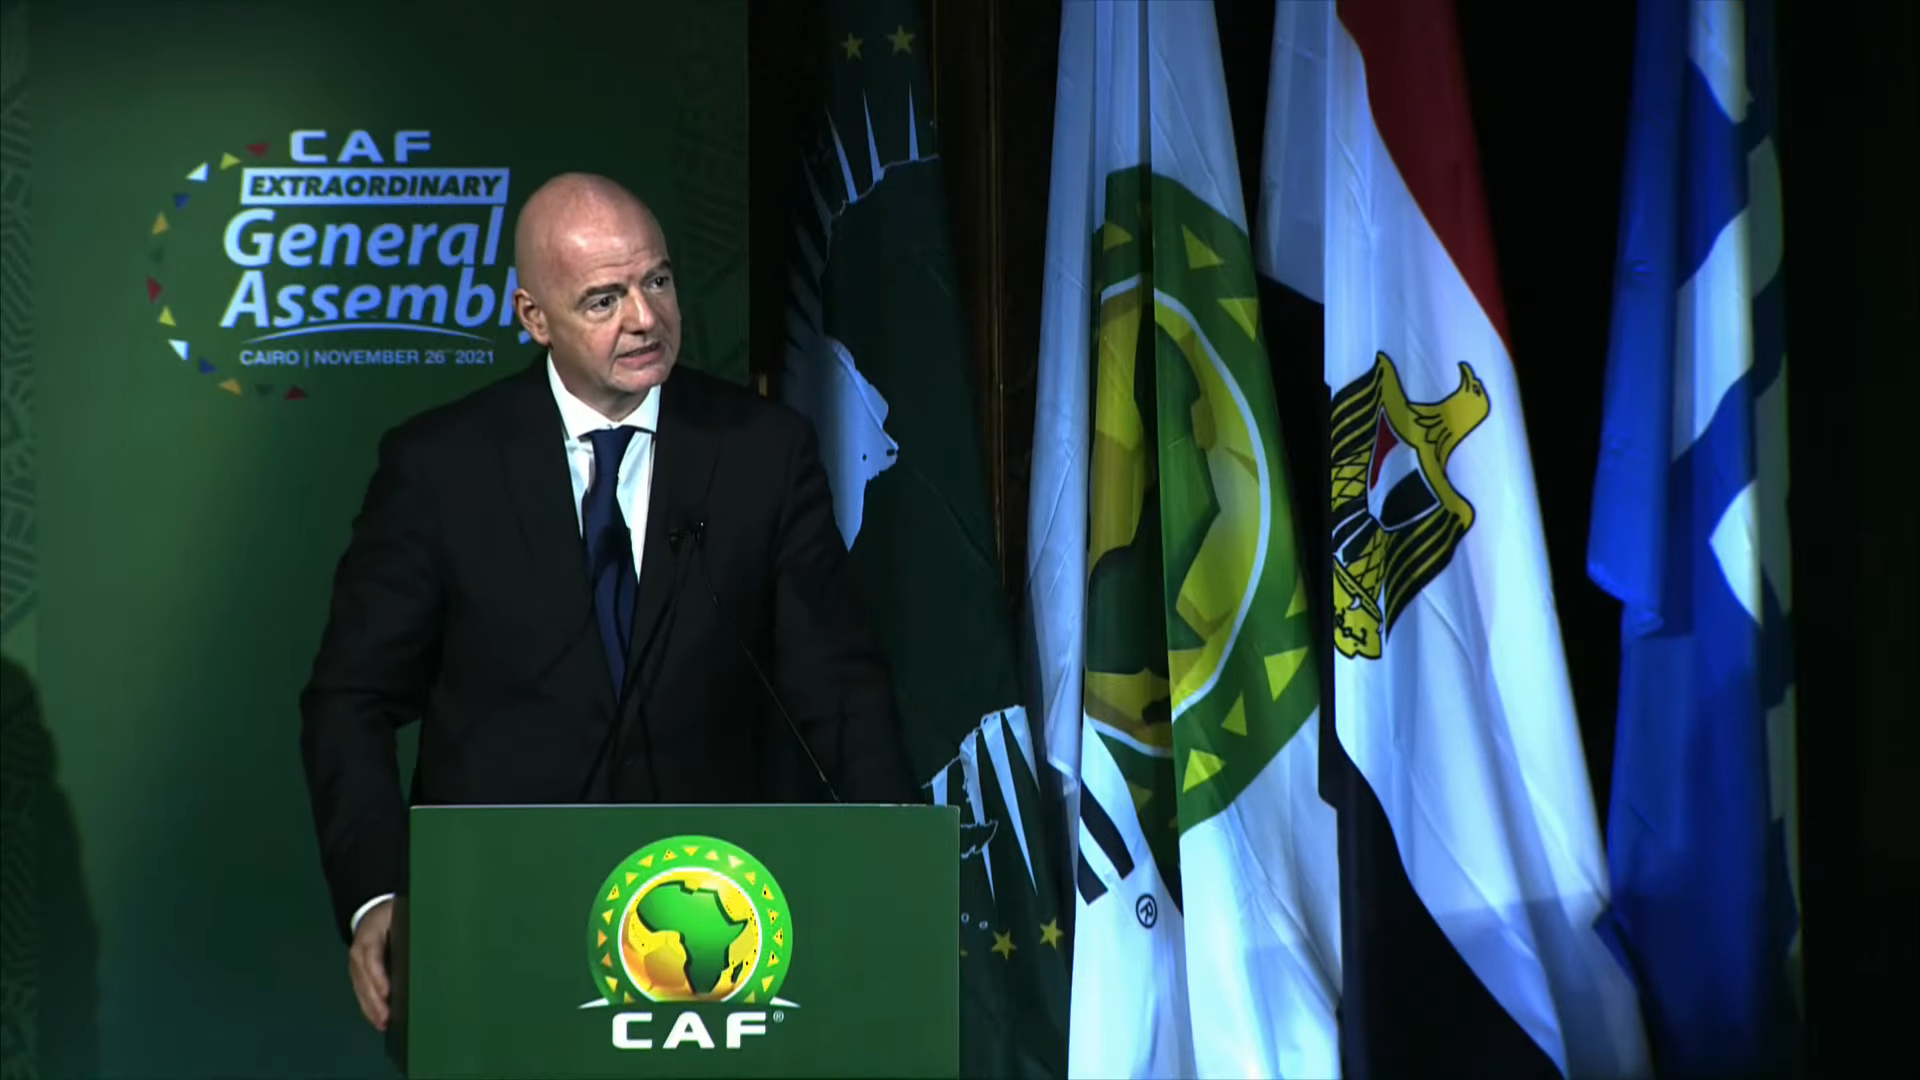 FIFA President Gianni Infantino addressed the CAF Congress, which backed his plan for biennial FIFA World Cups ©CAF